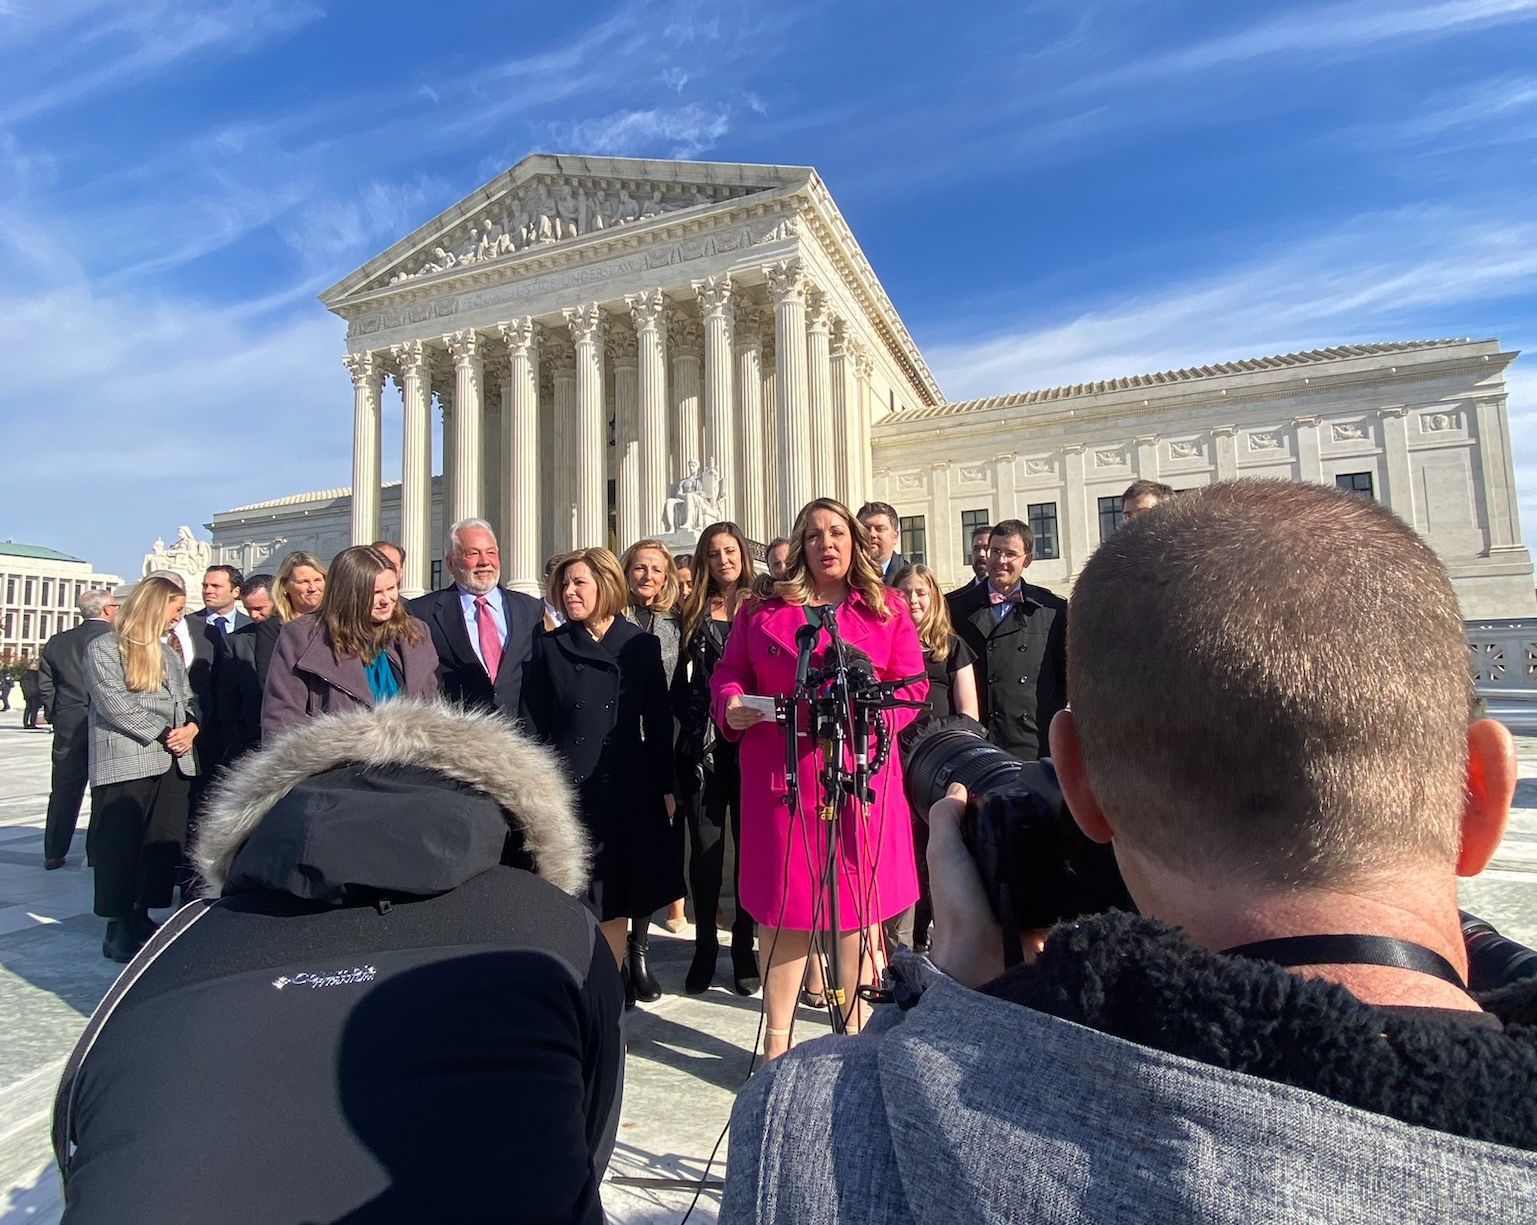 A woman in a winter coat speaks at a microphone, surrounded by supporters, with the Supreme Court building in the background.